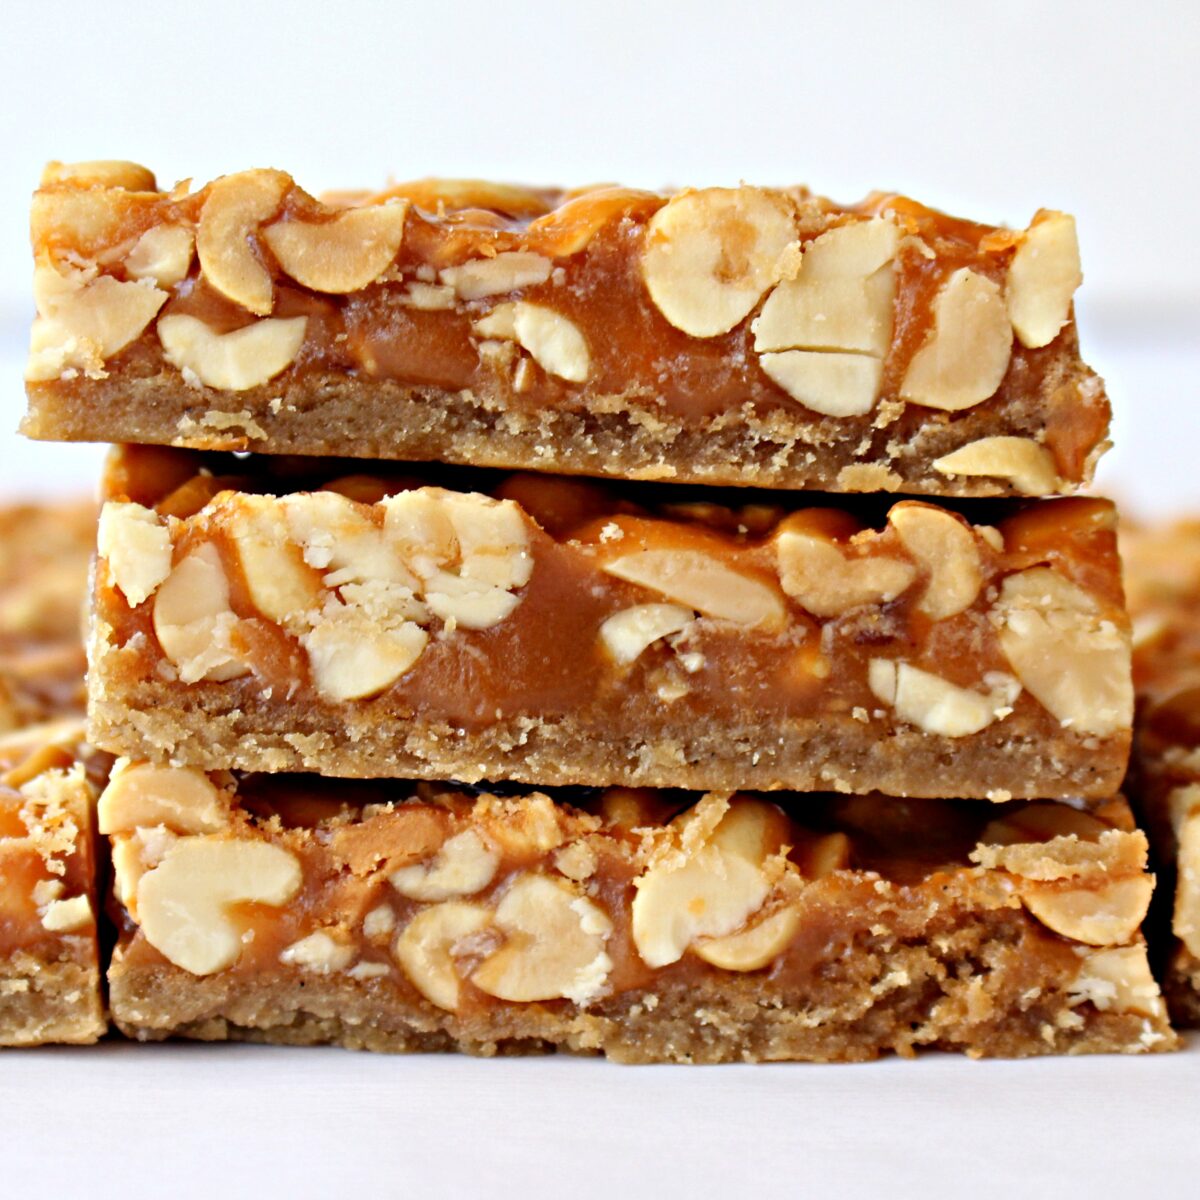 Stacked Peanut Bars showing shortbread crust topped with butterscotch and peanuts.